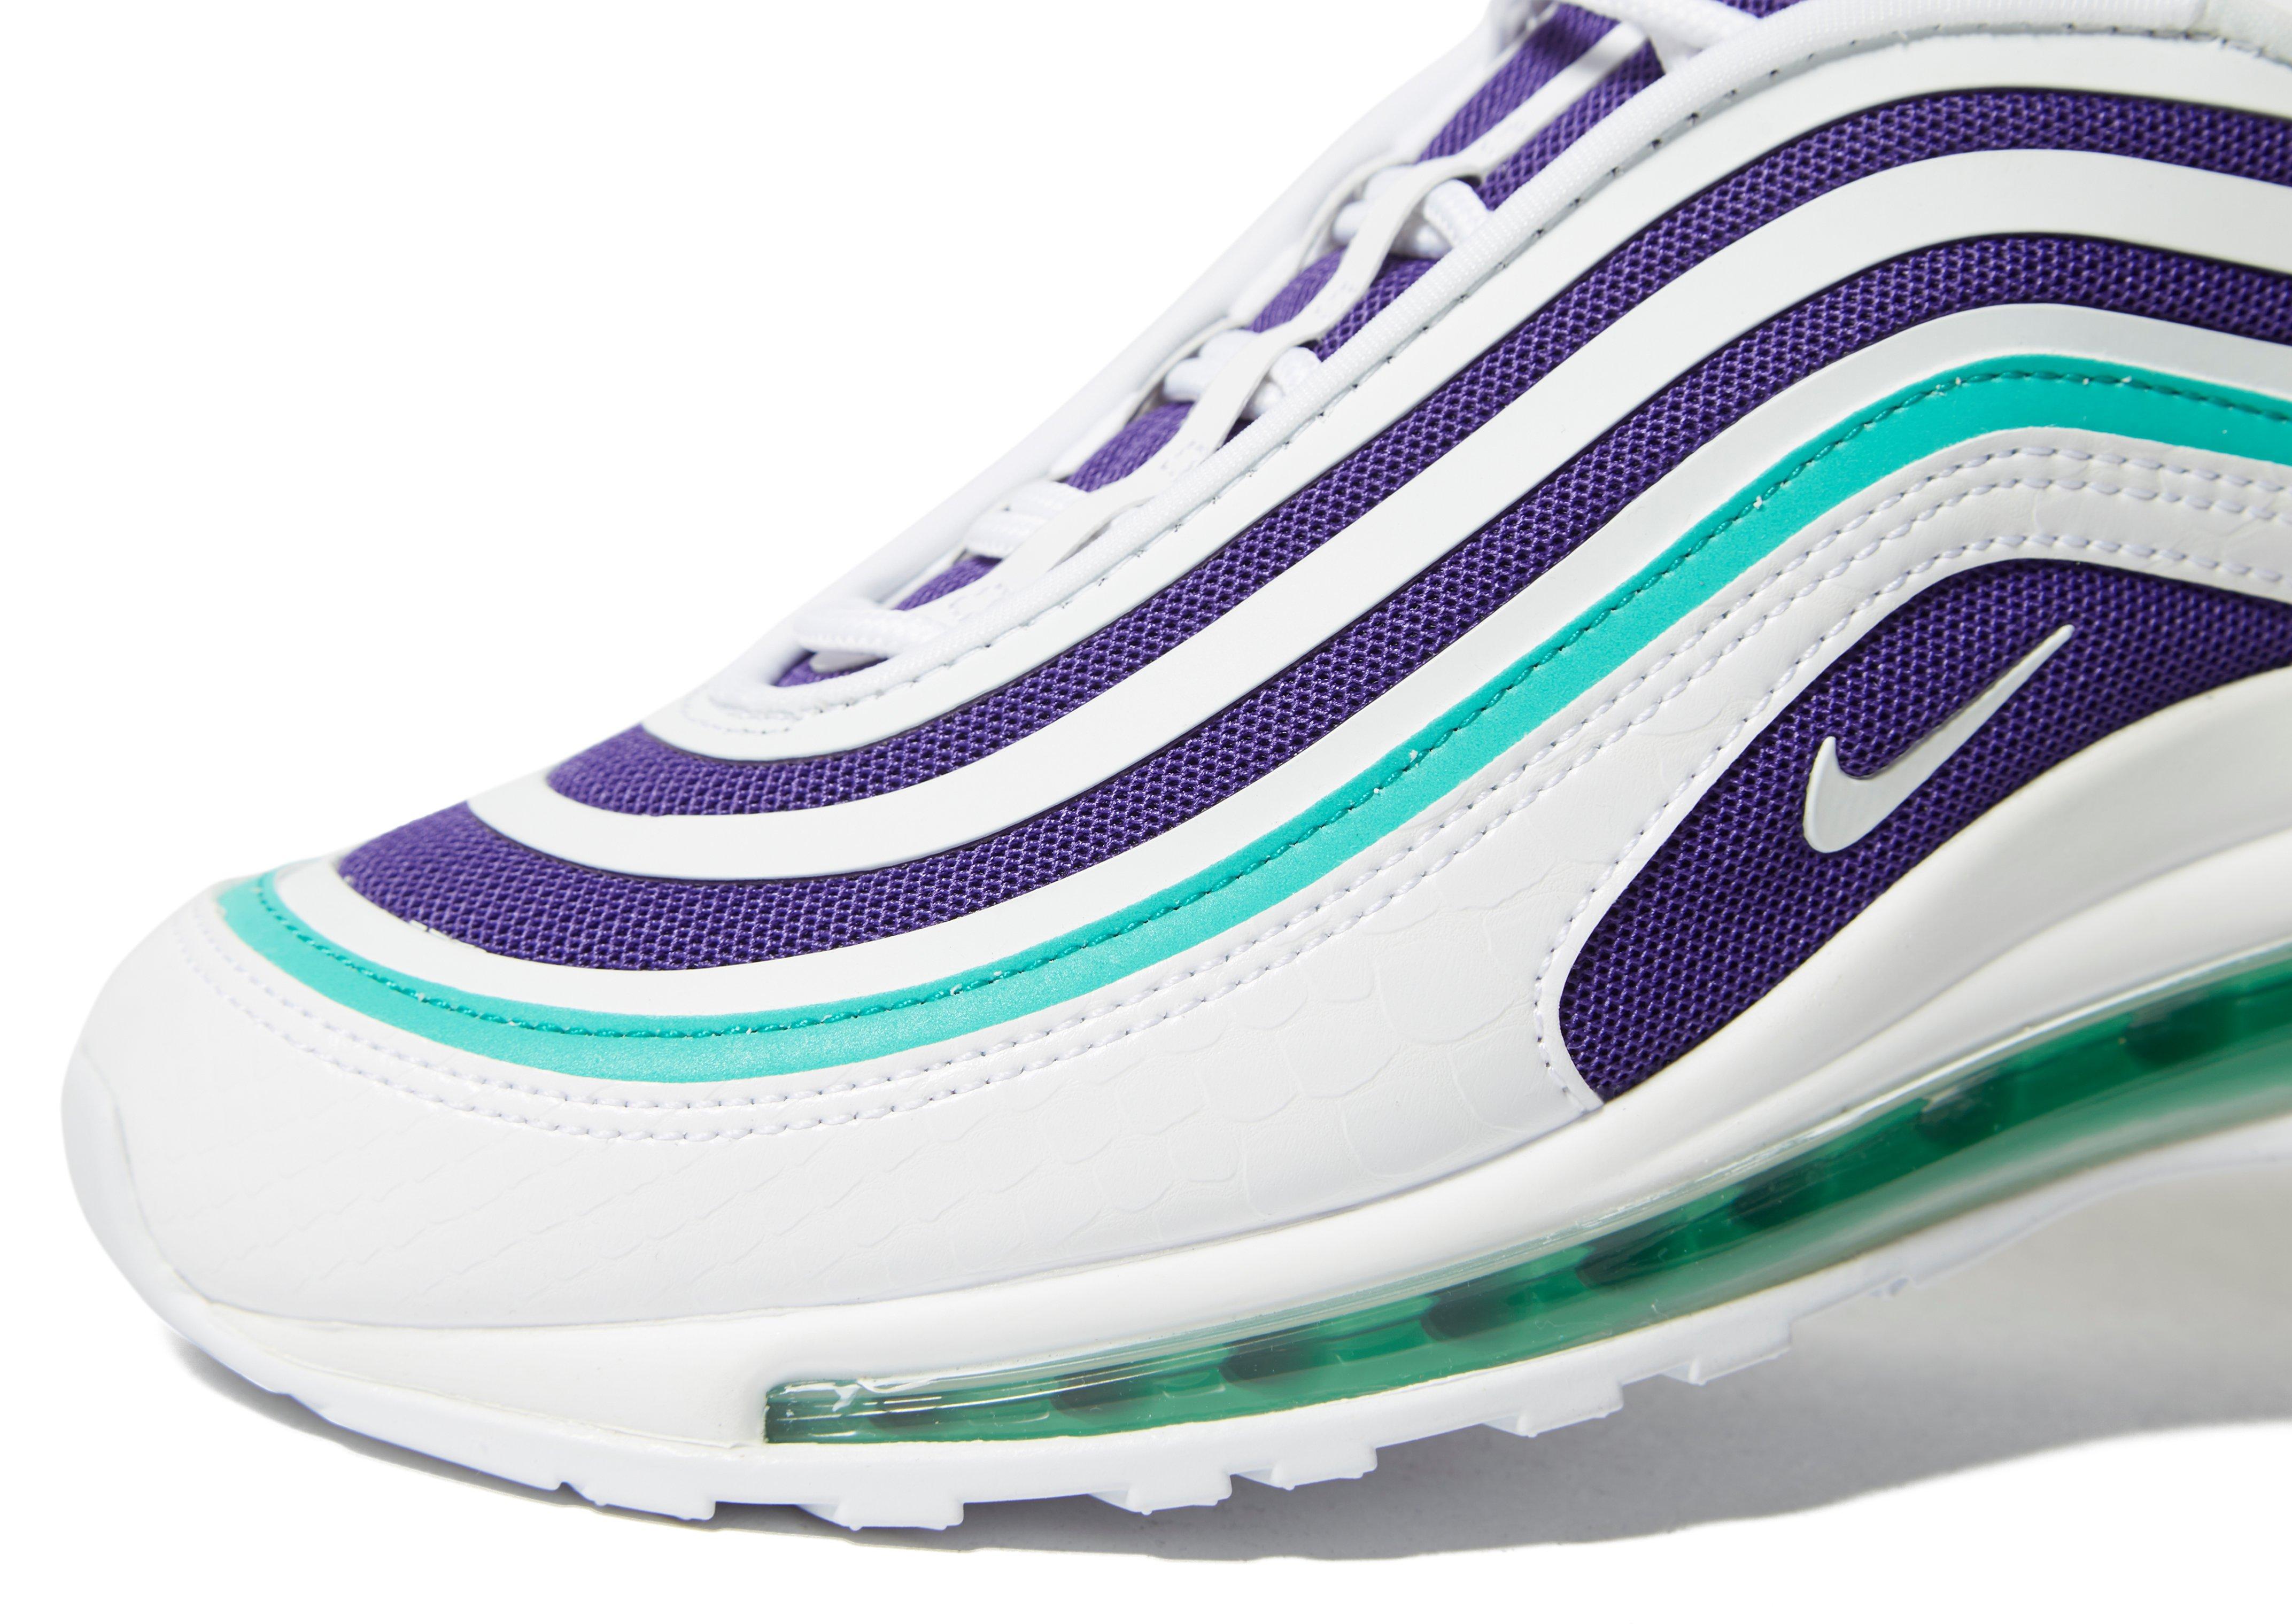 Nike Neoprene Air Max 97 Ultra Trainers In White And Purple - Lyst